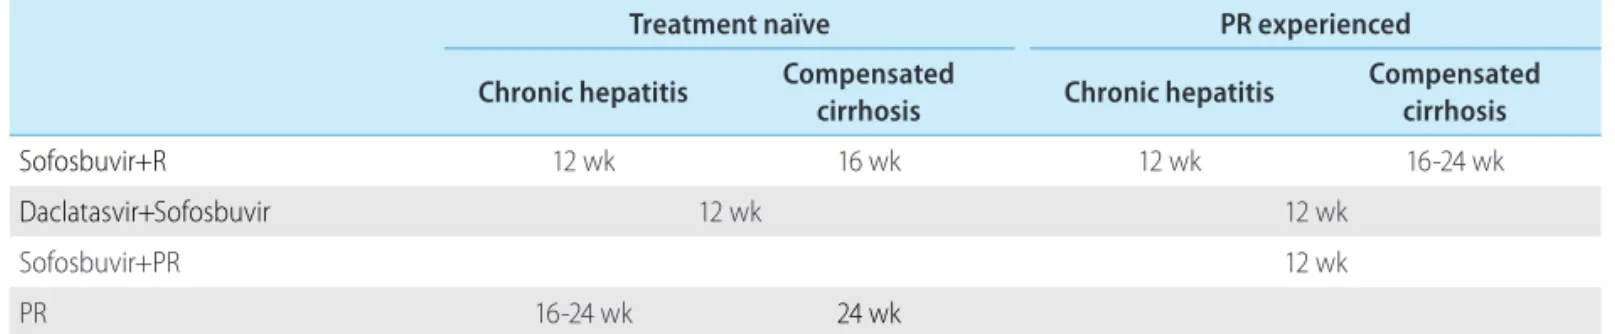 Table 8. Treatment of HCV genotype 2 infection in chronic hepatitis or compensated cirrhosis 　